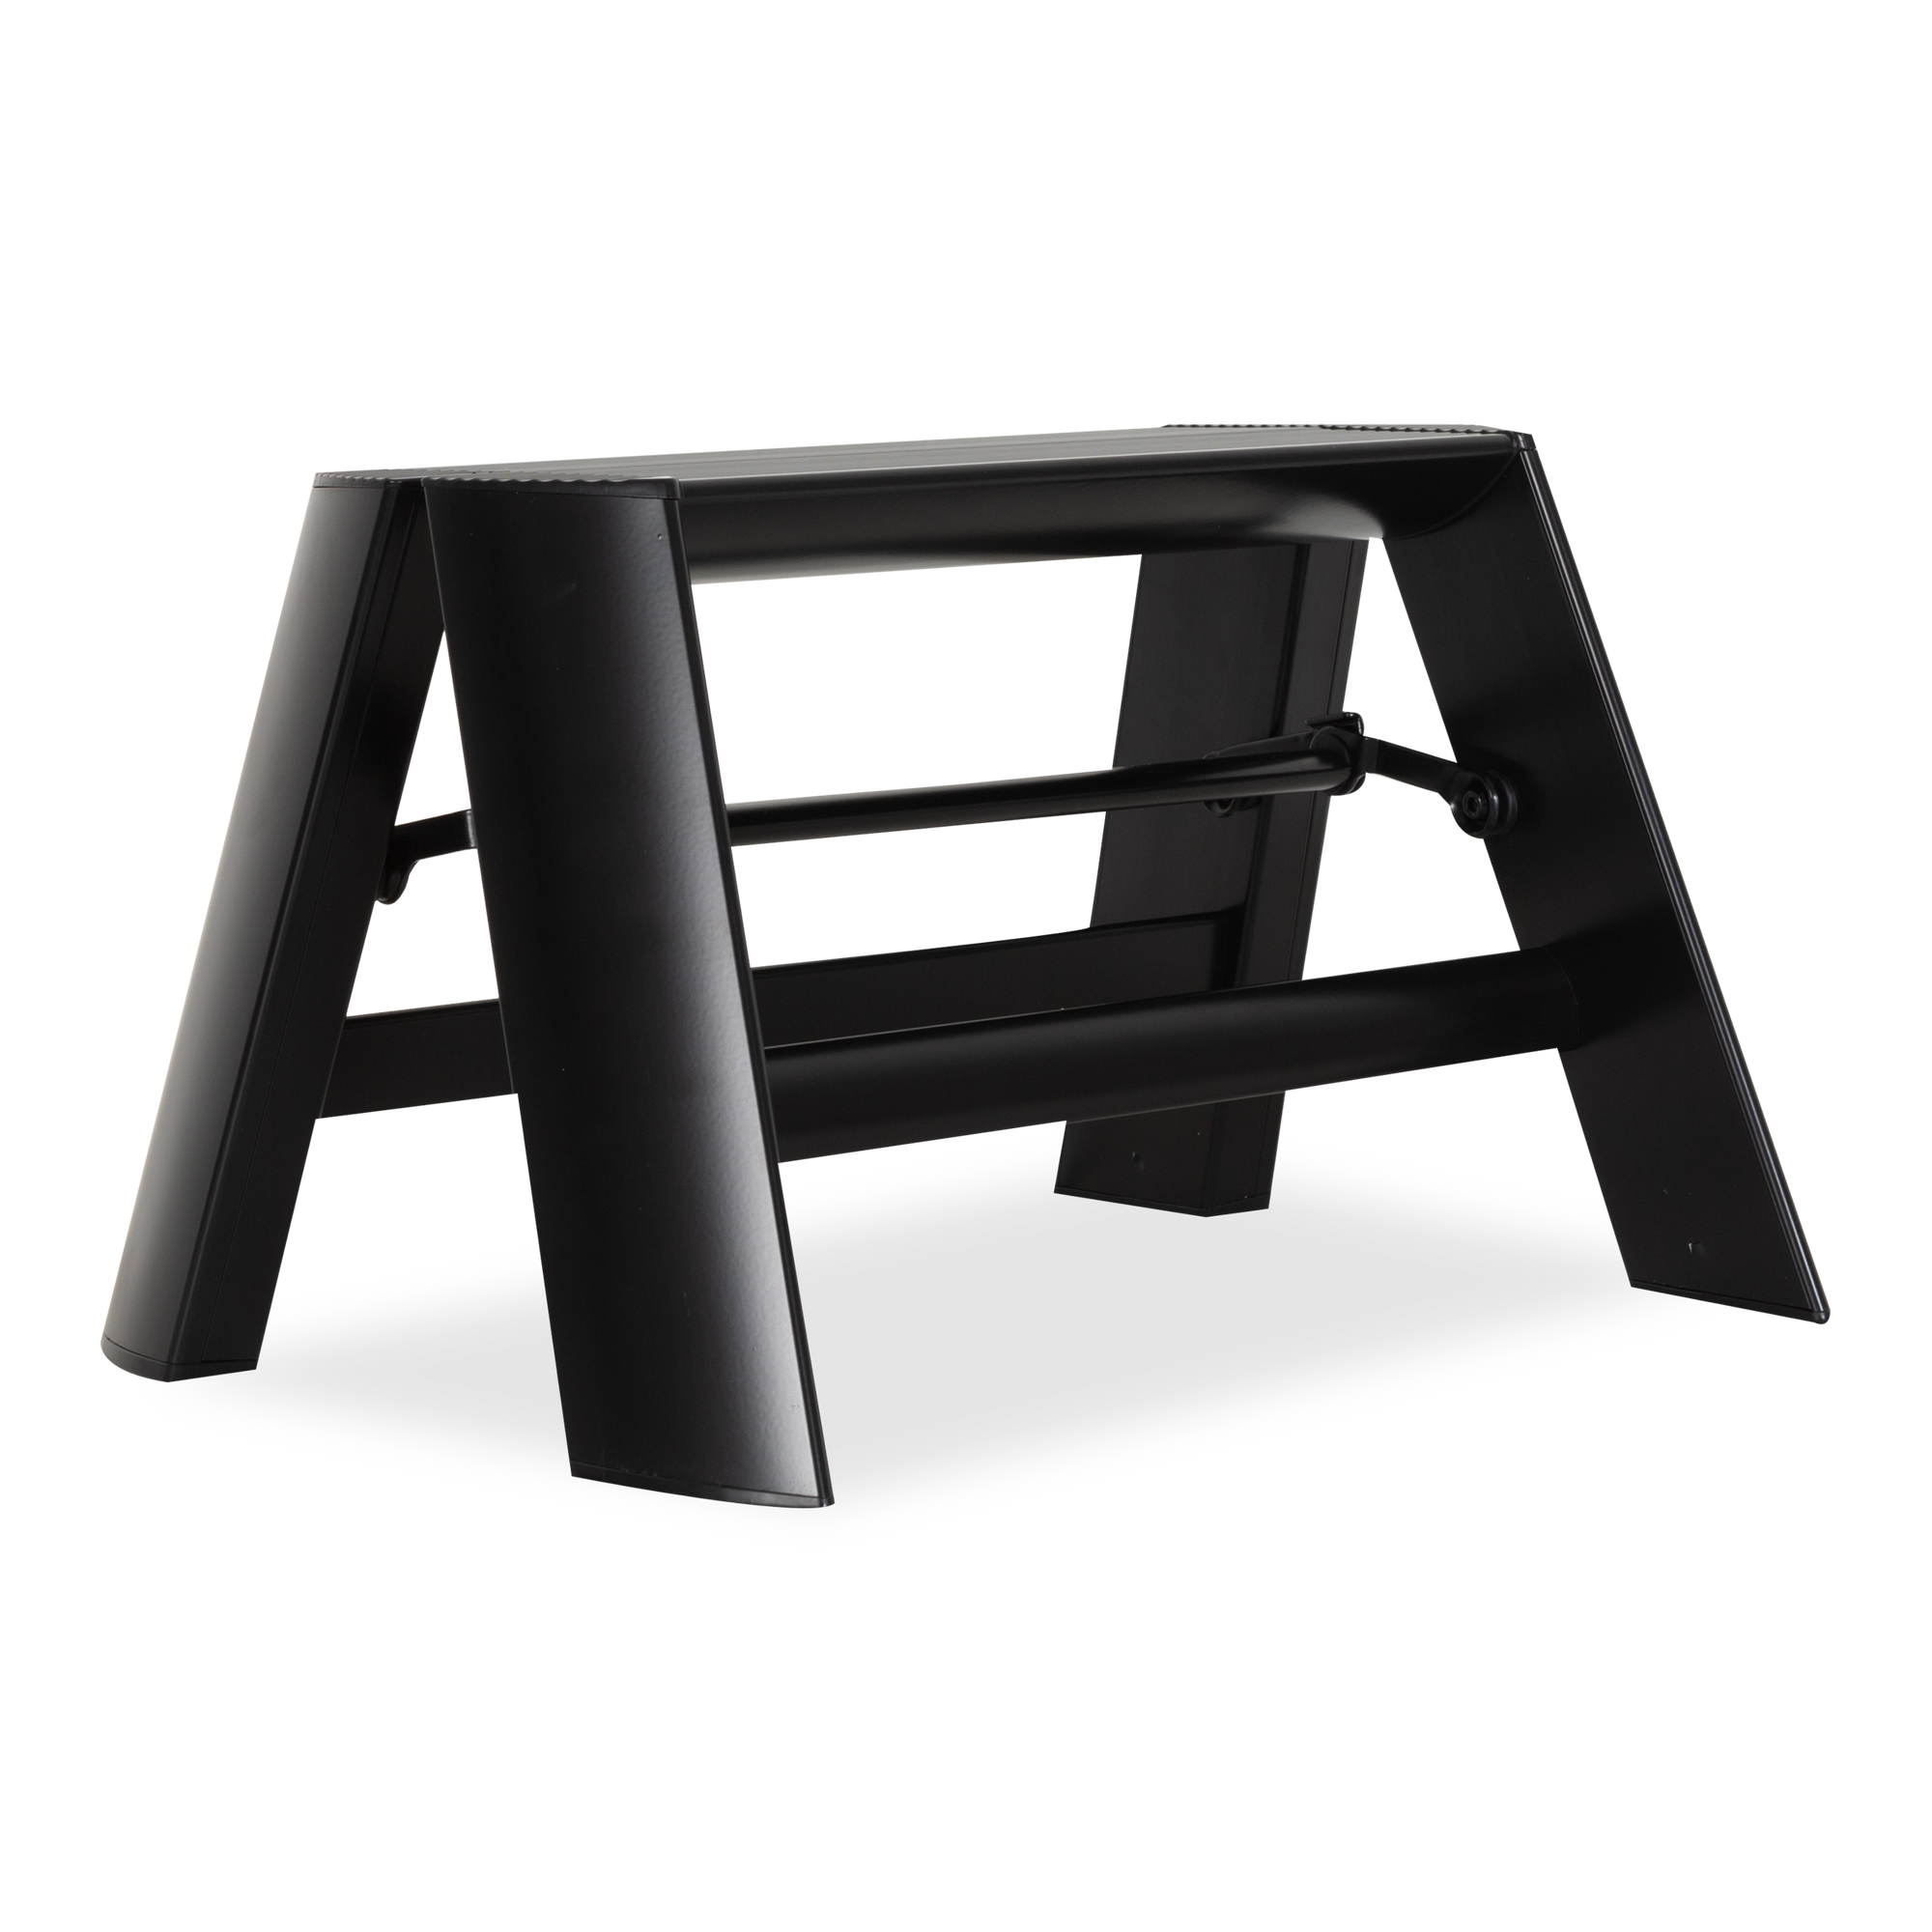 The 1 Step Ladder in black is incredibly slim when folded but features wide legs to reinforce stability and safety.